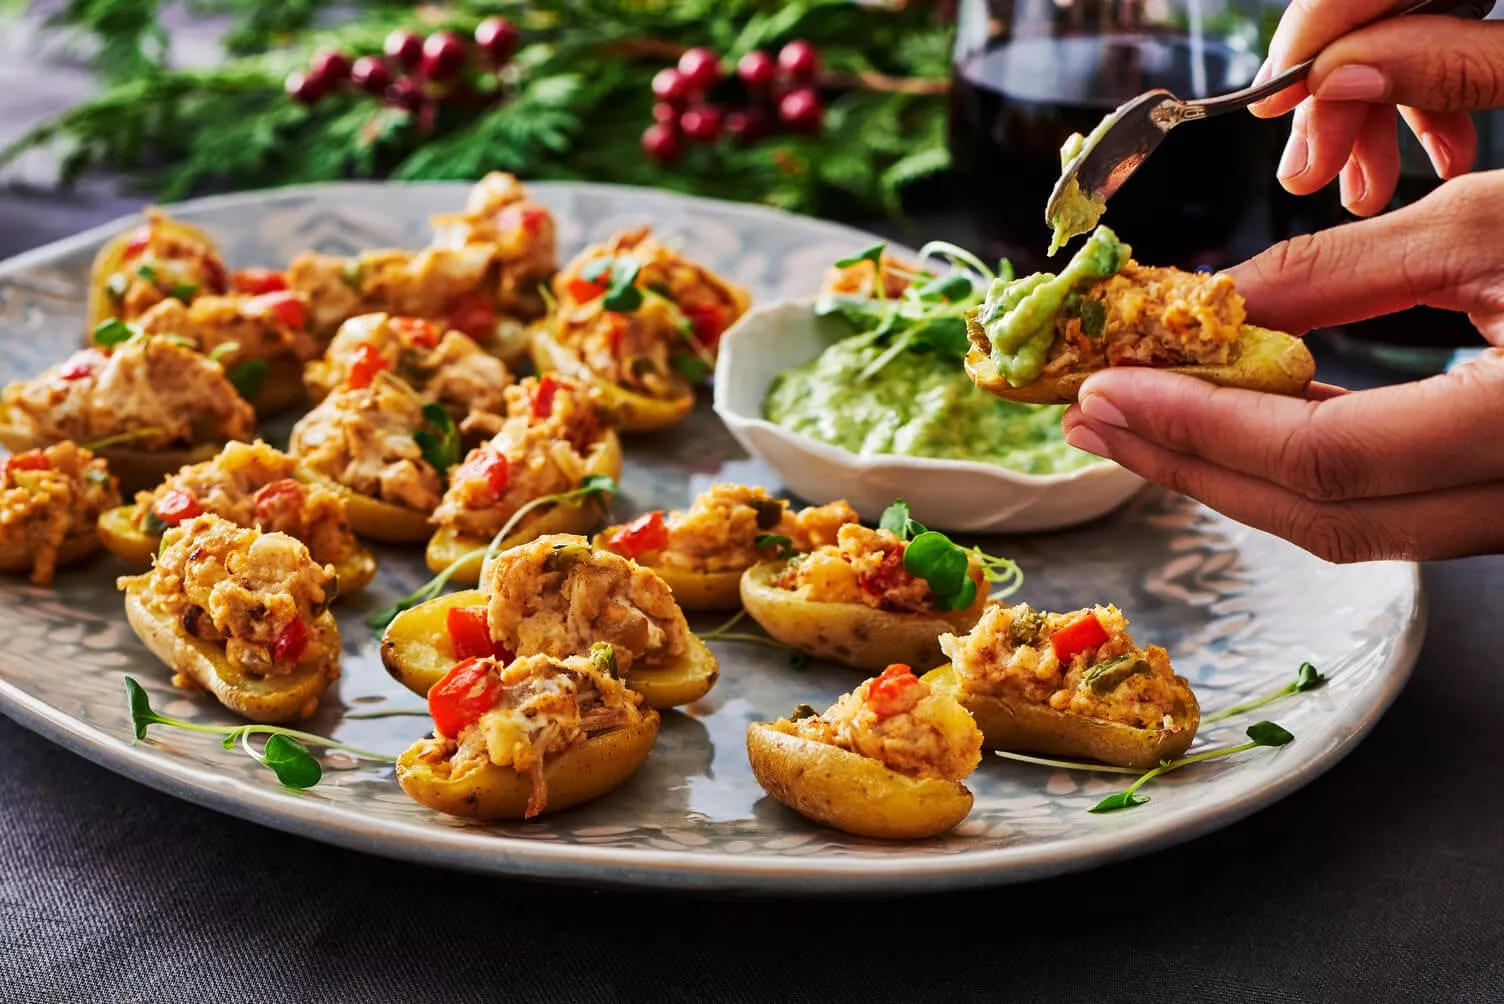 A plate of stuffed potato caps with turkey leftovers.